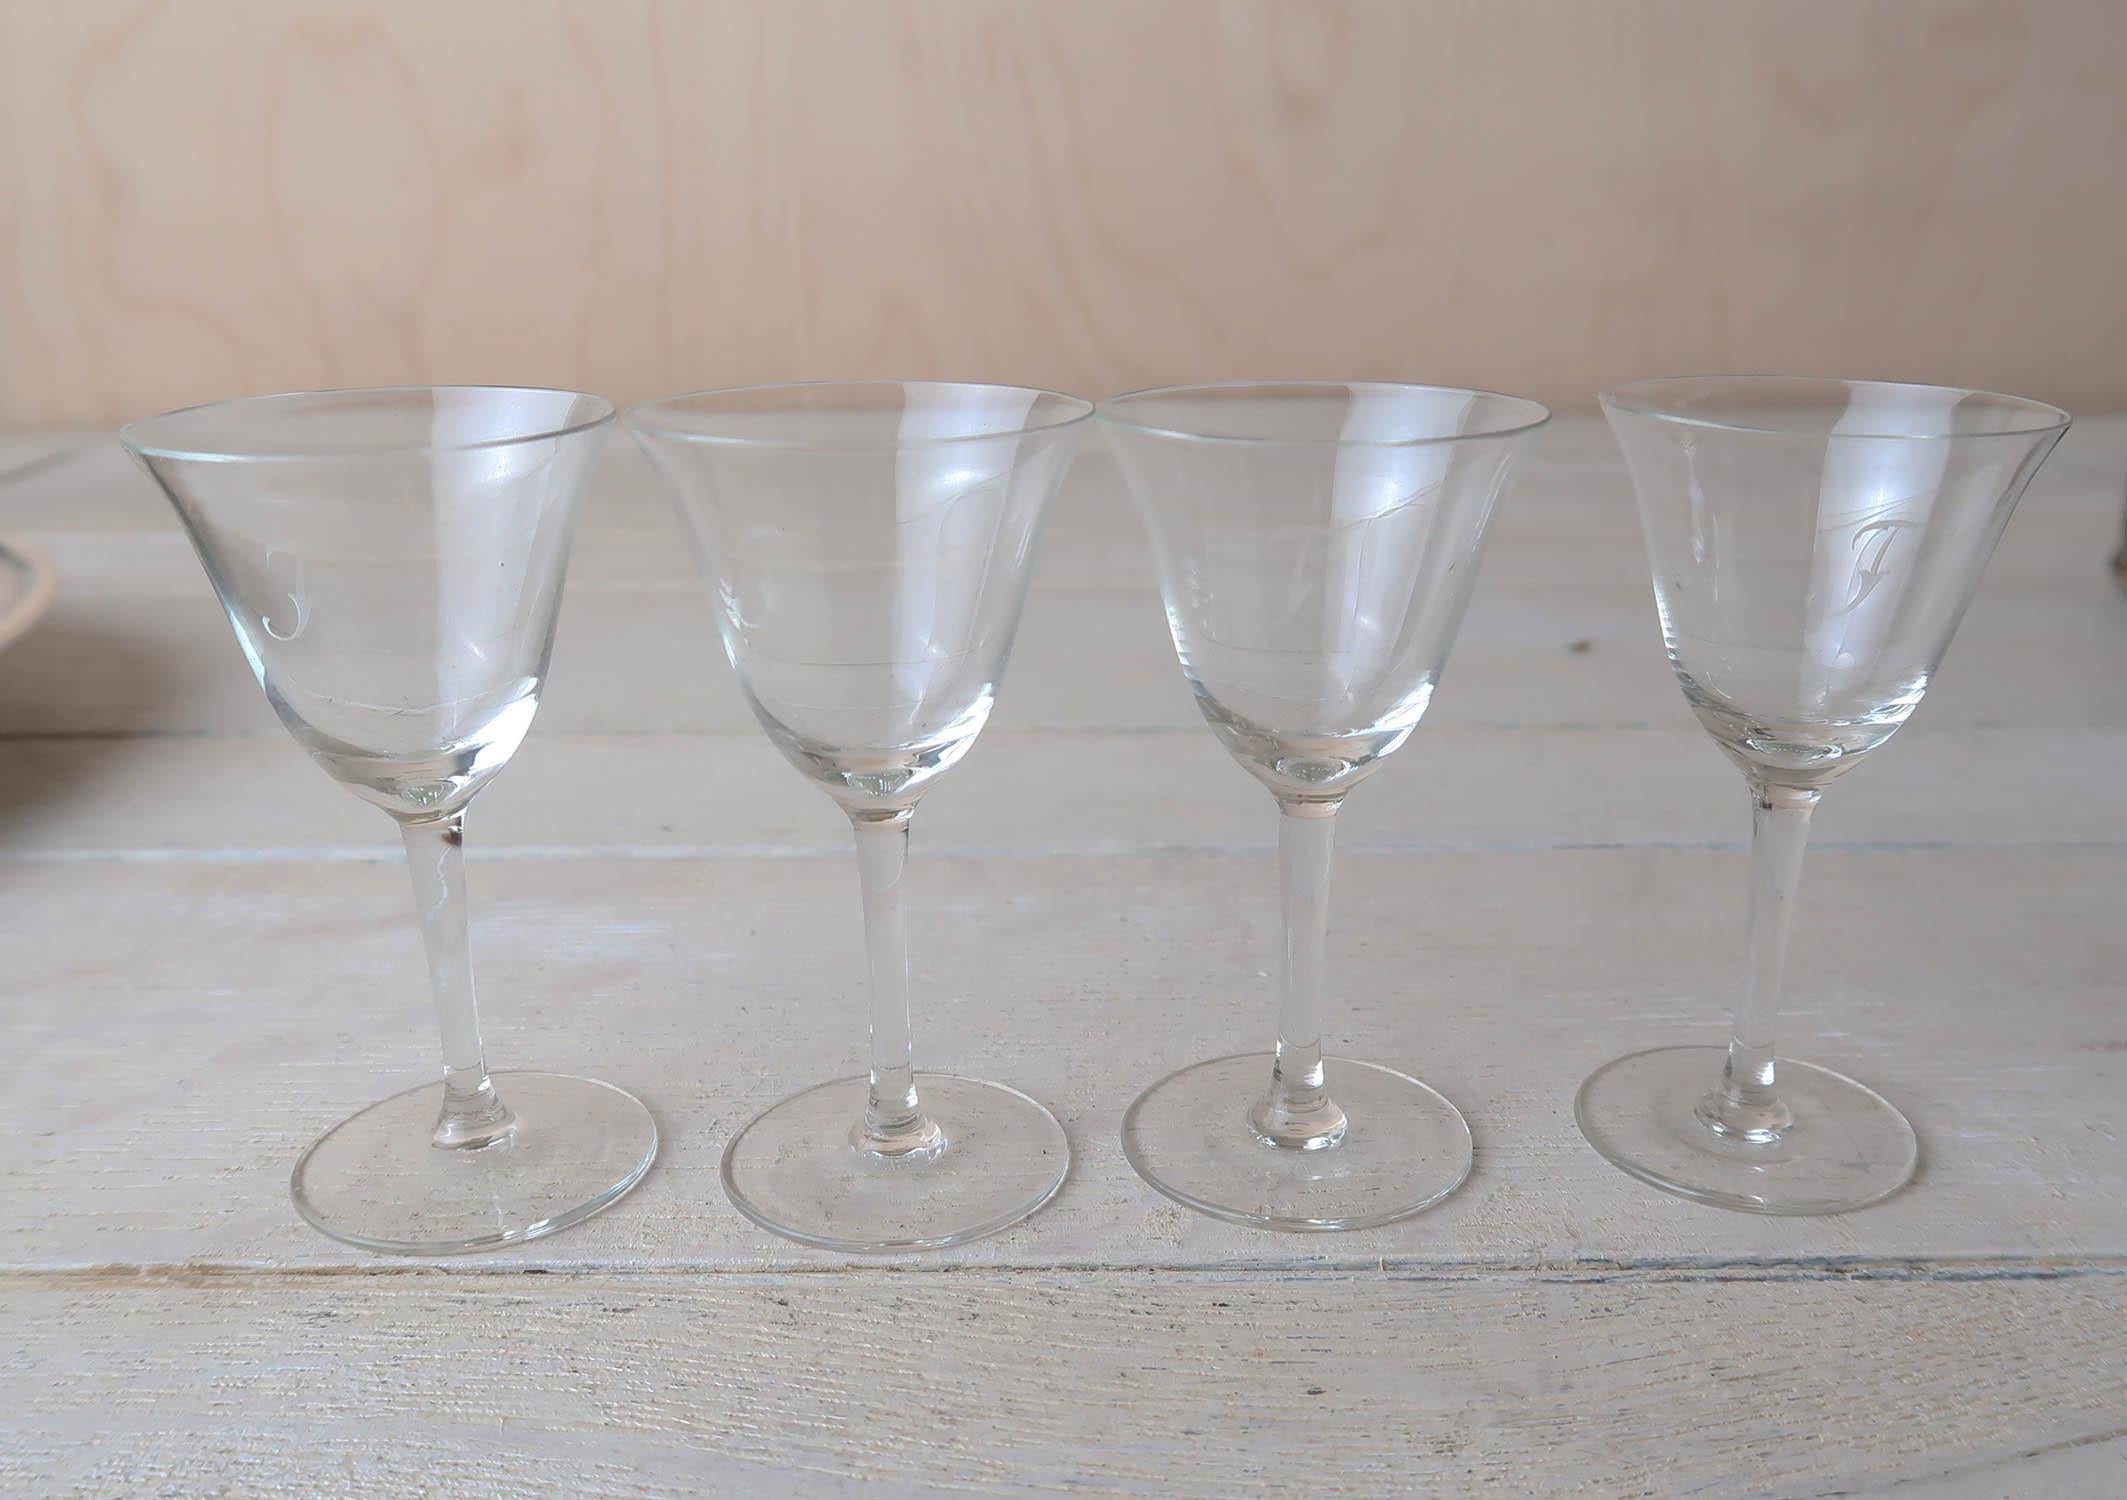 Nice set of 4 of the finest glasses. 

Each one engraved with the letter 